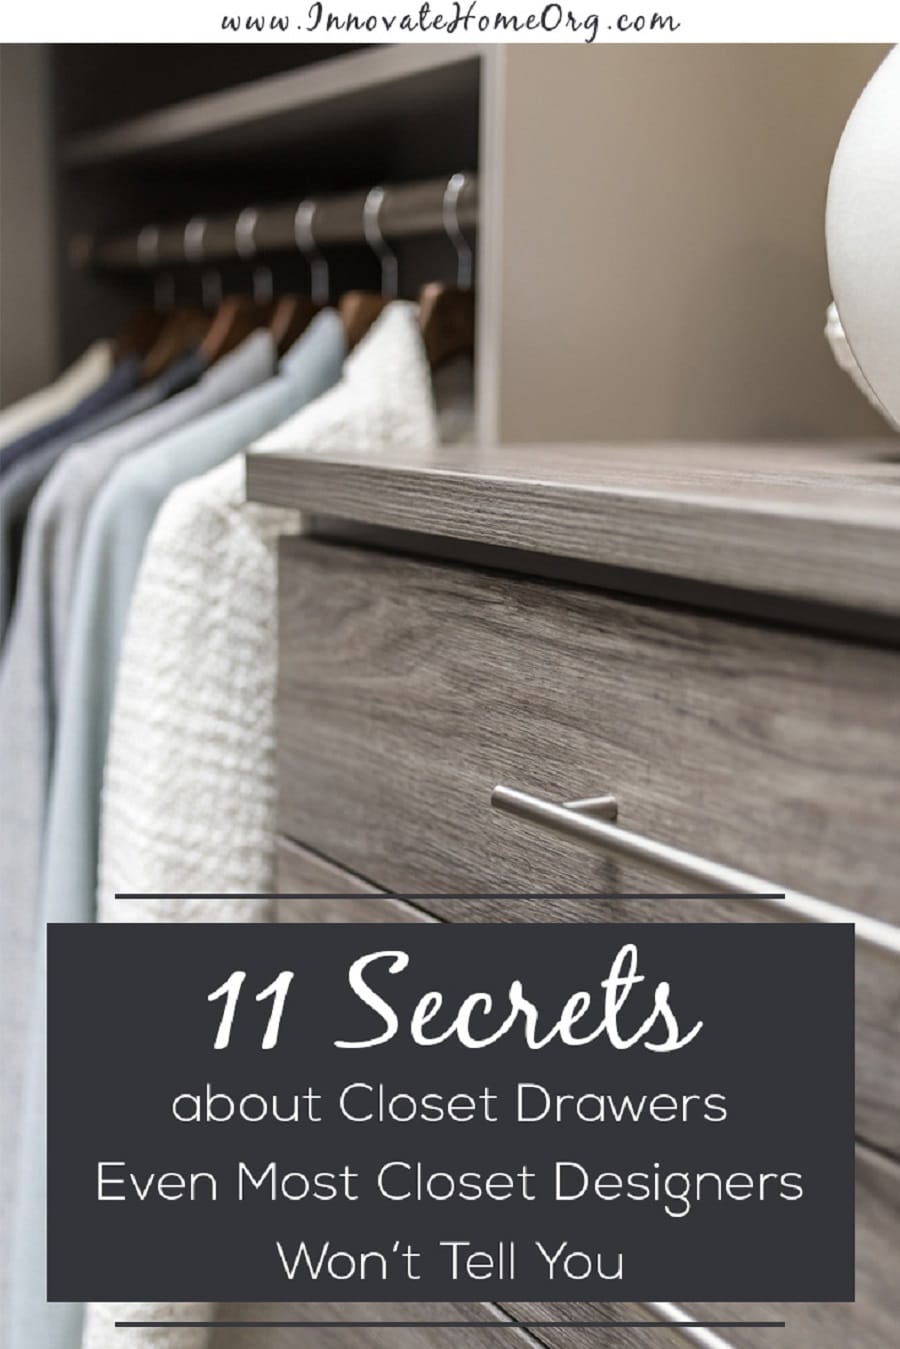 Question 6 closet drawer tips ideas New Albany Ohio | Innovate Home Org #ClosetDrawers #ClosetHardware #Storage